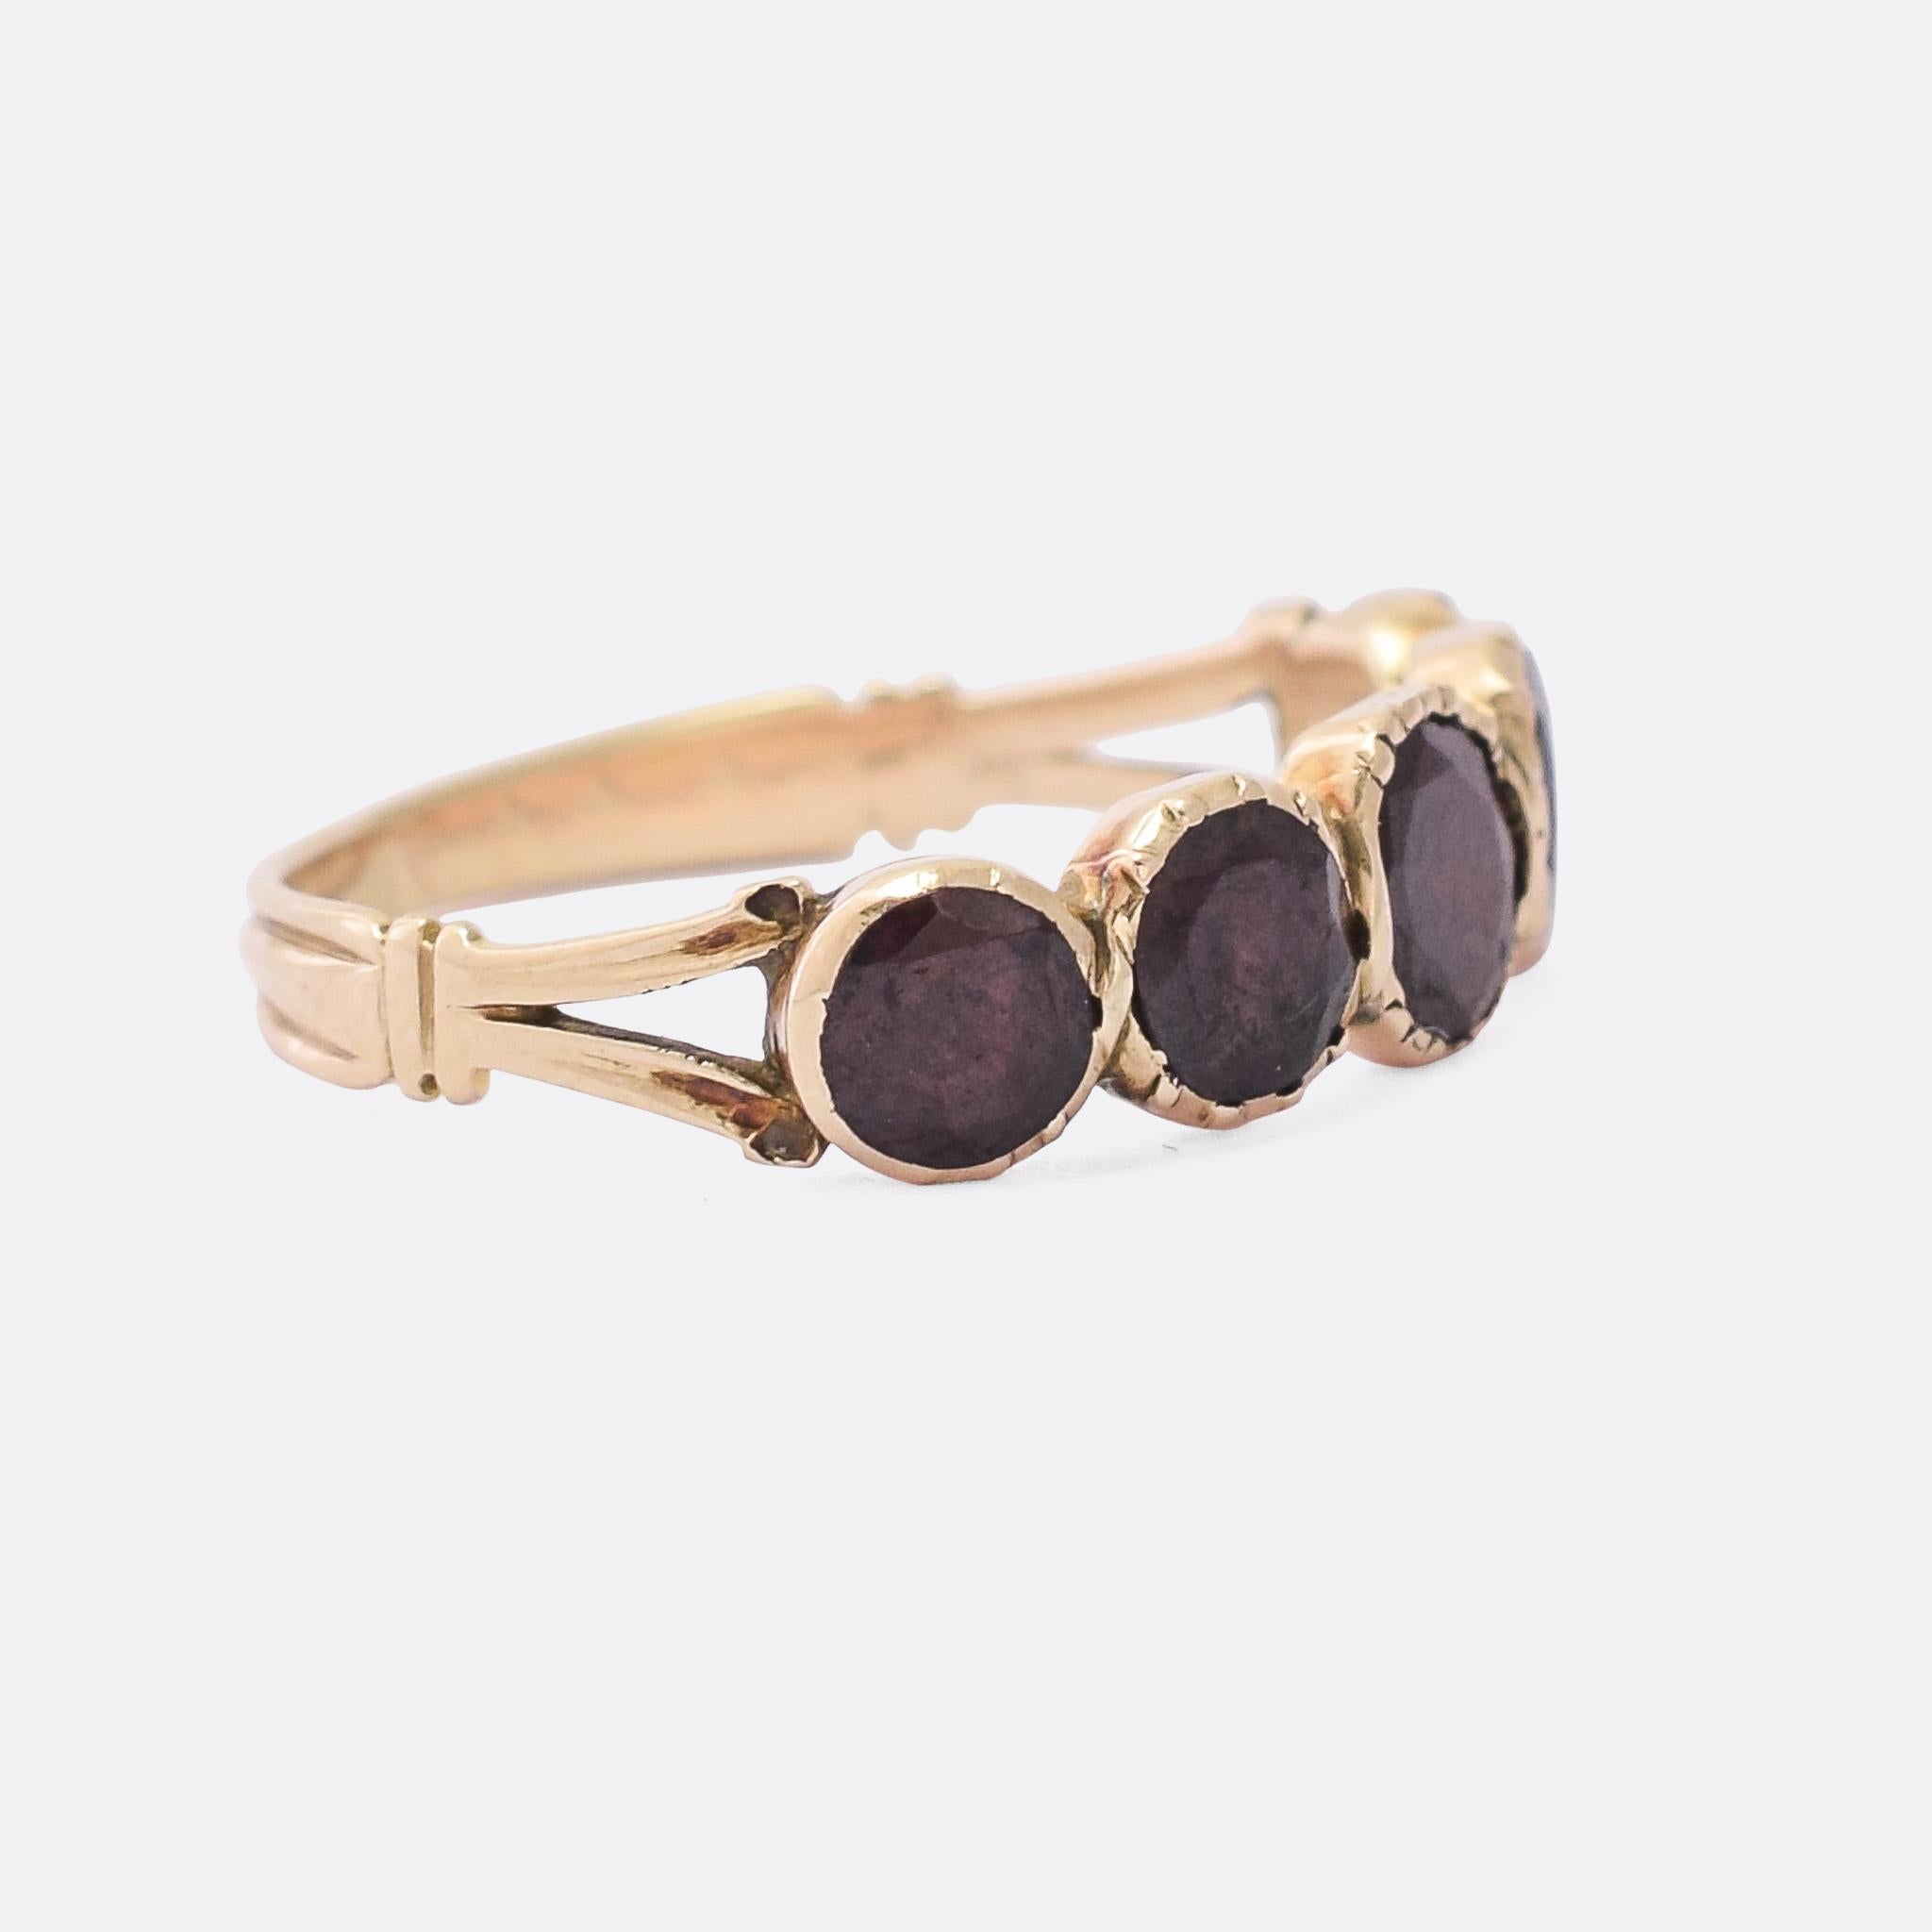 A gorgeous Georgian flat-cut garnet half hoop ring dating from the turn of the 19th Century. The five stones rest in foil backed pie-crust settings, and show great colour and illumination as the light reflects off the foil and back through them. It